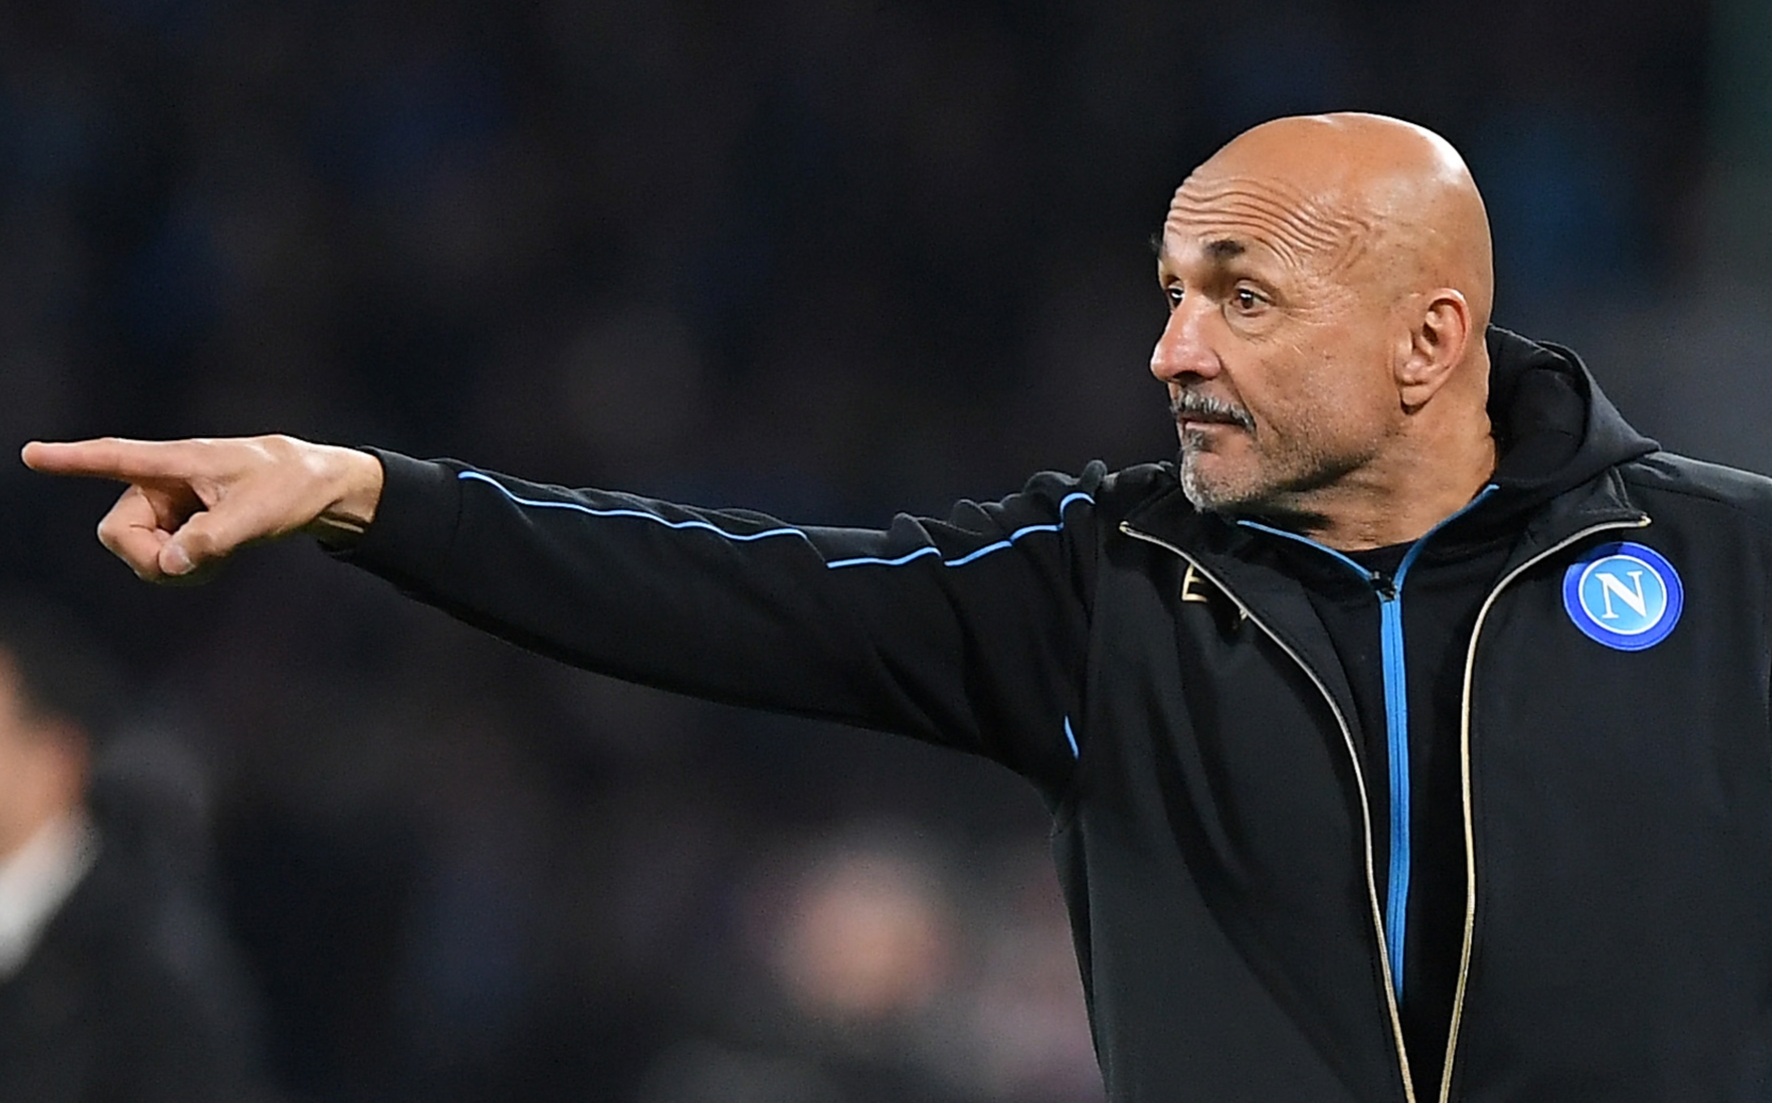 Prior to Napoli's fixture against Lazio, Spalletti spoke to the press this afternoon about the difficult moment his side find themselves so far this season.